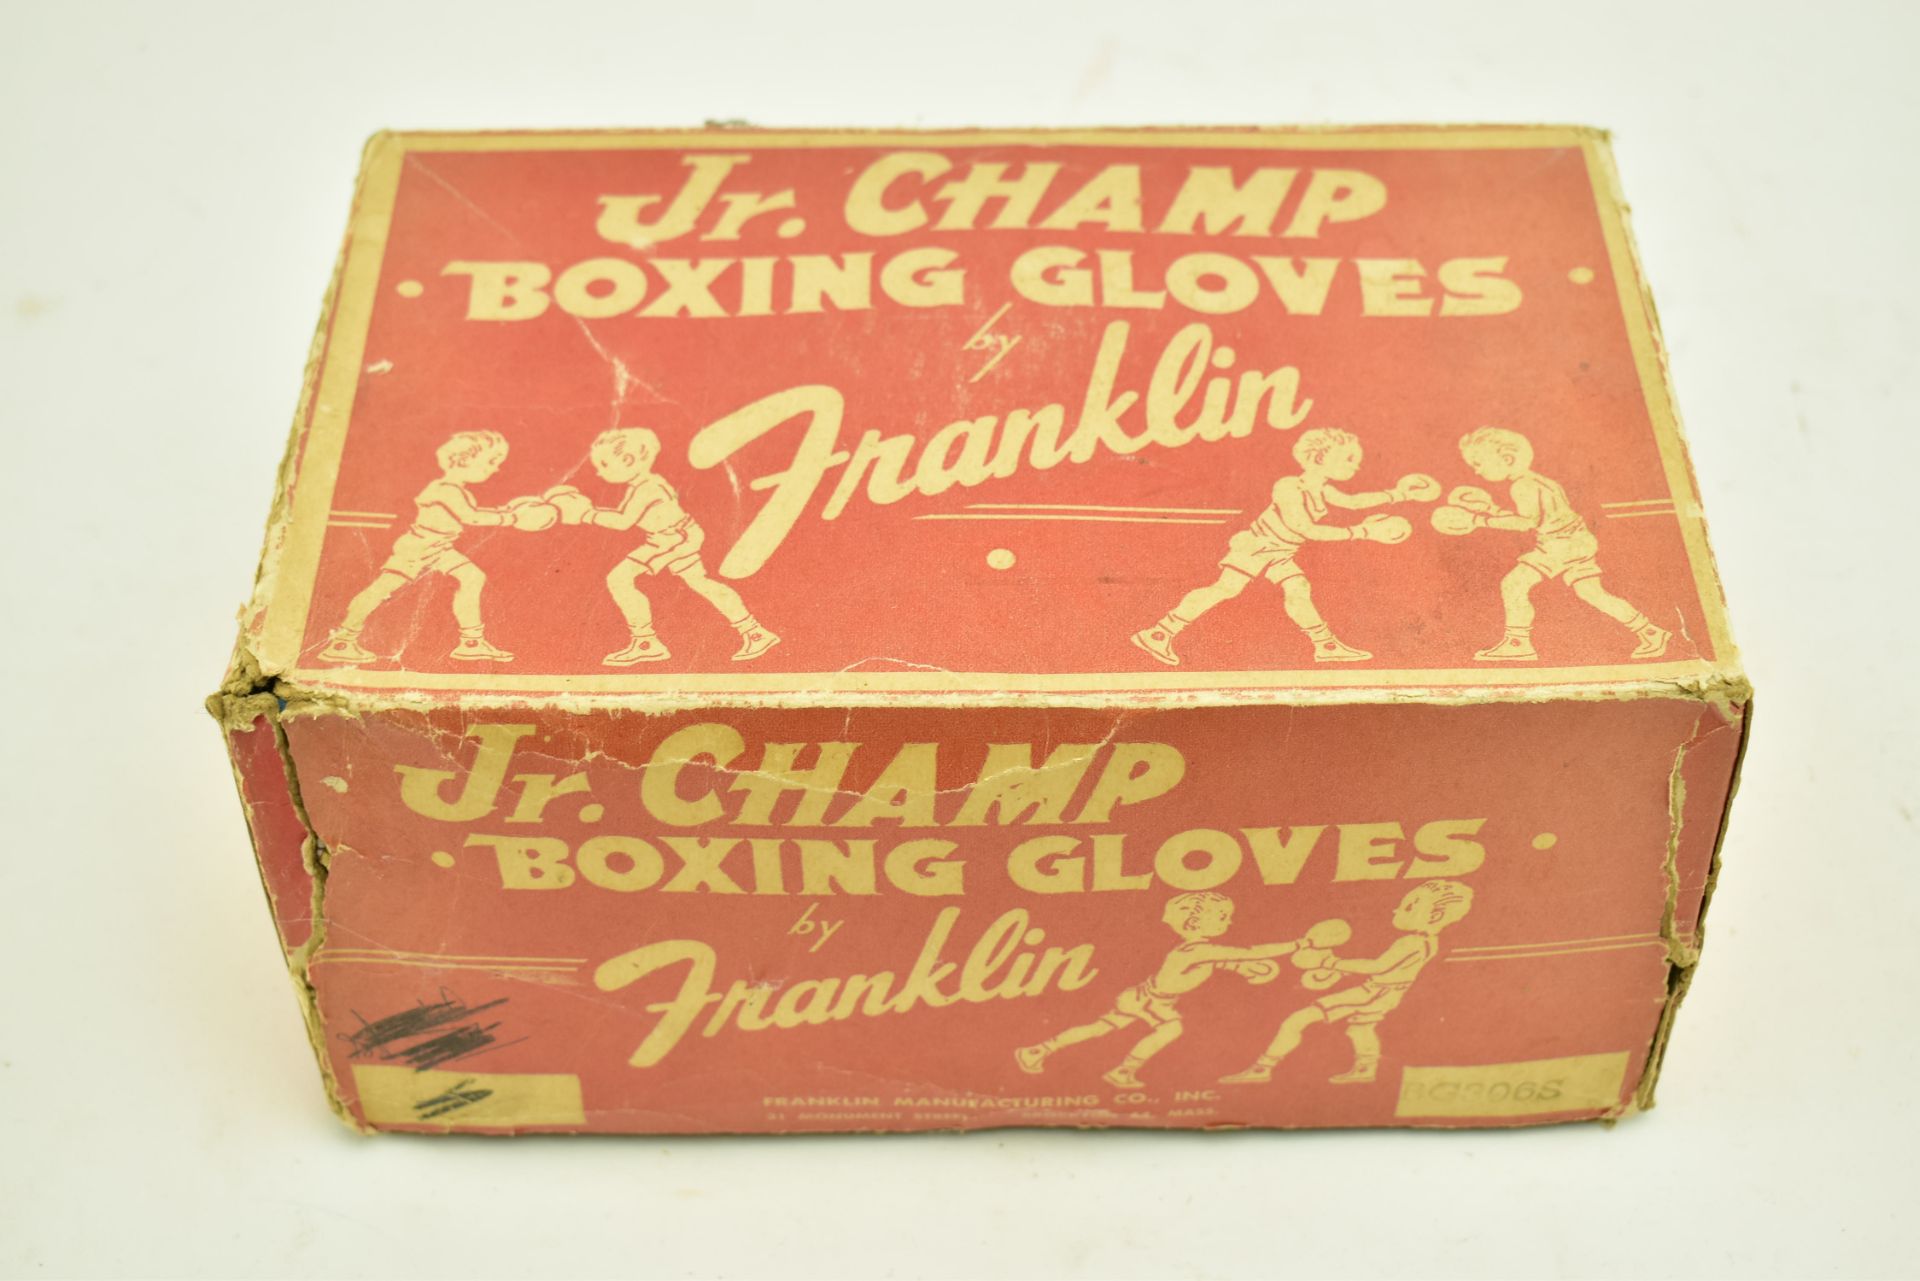 FRANKLIN - 1940S PAIR OF CHAMP BOXING GLOVES IN ORIGINAL BOX - Image 8 of 8